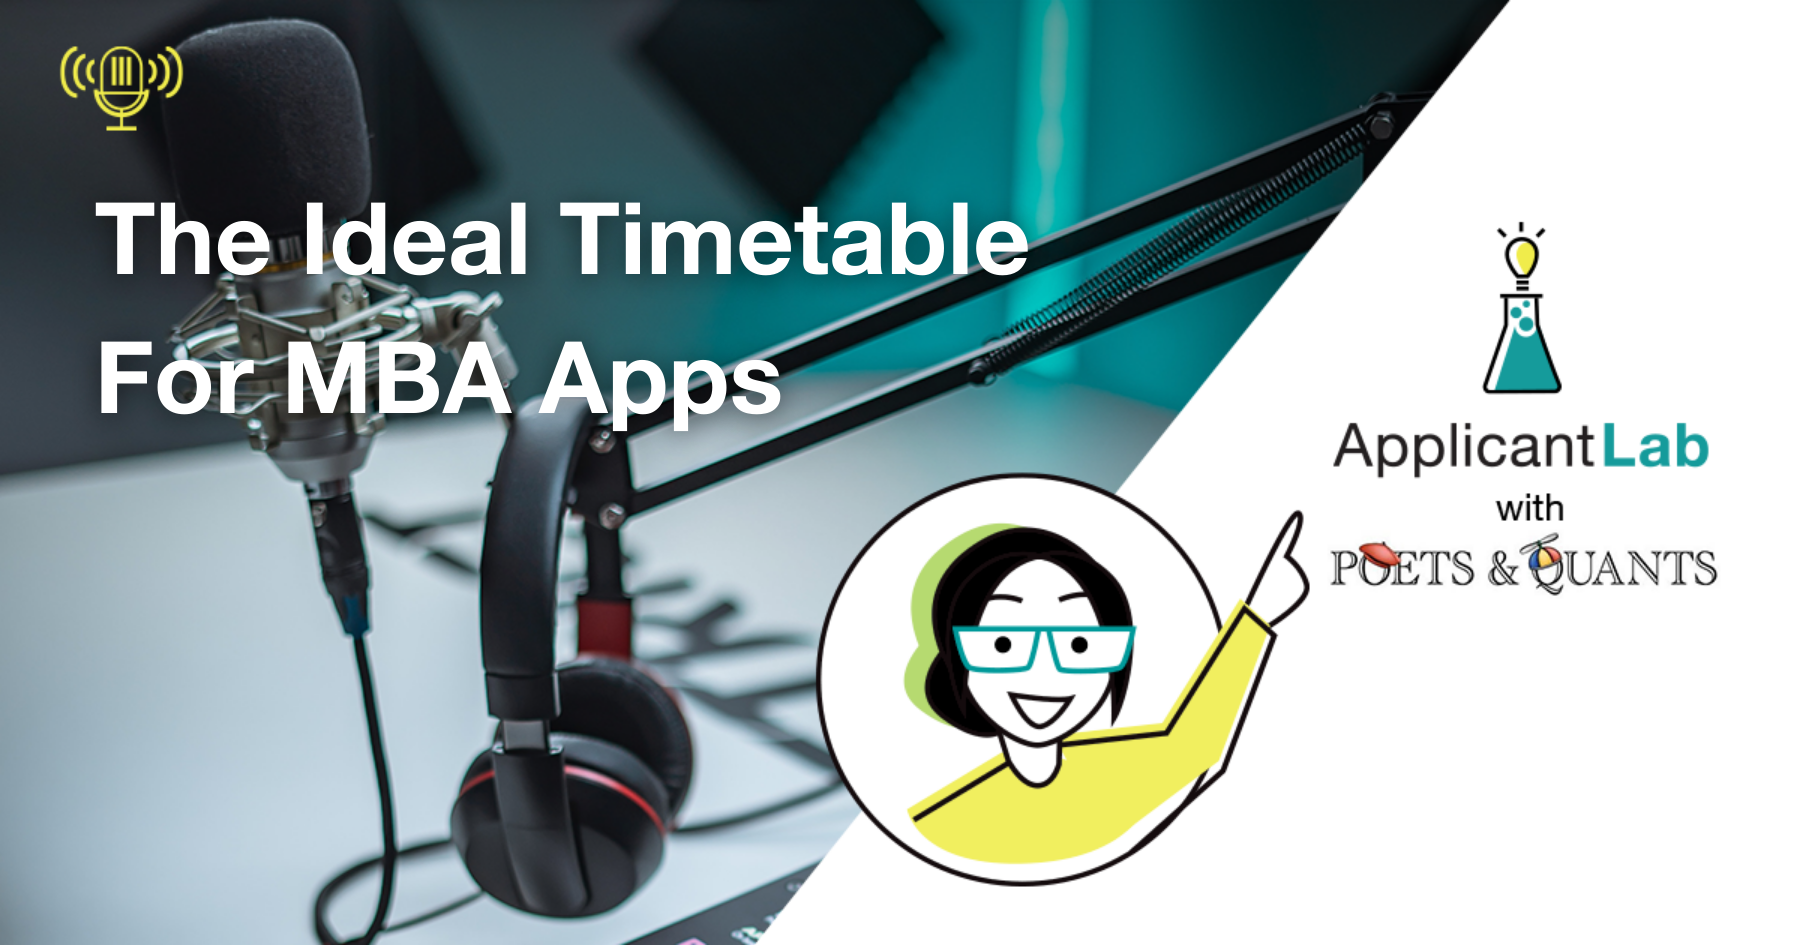 The Ideal Timetable For MBA Apps